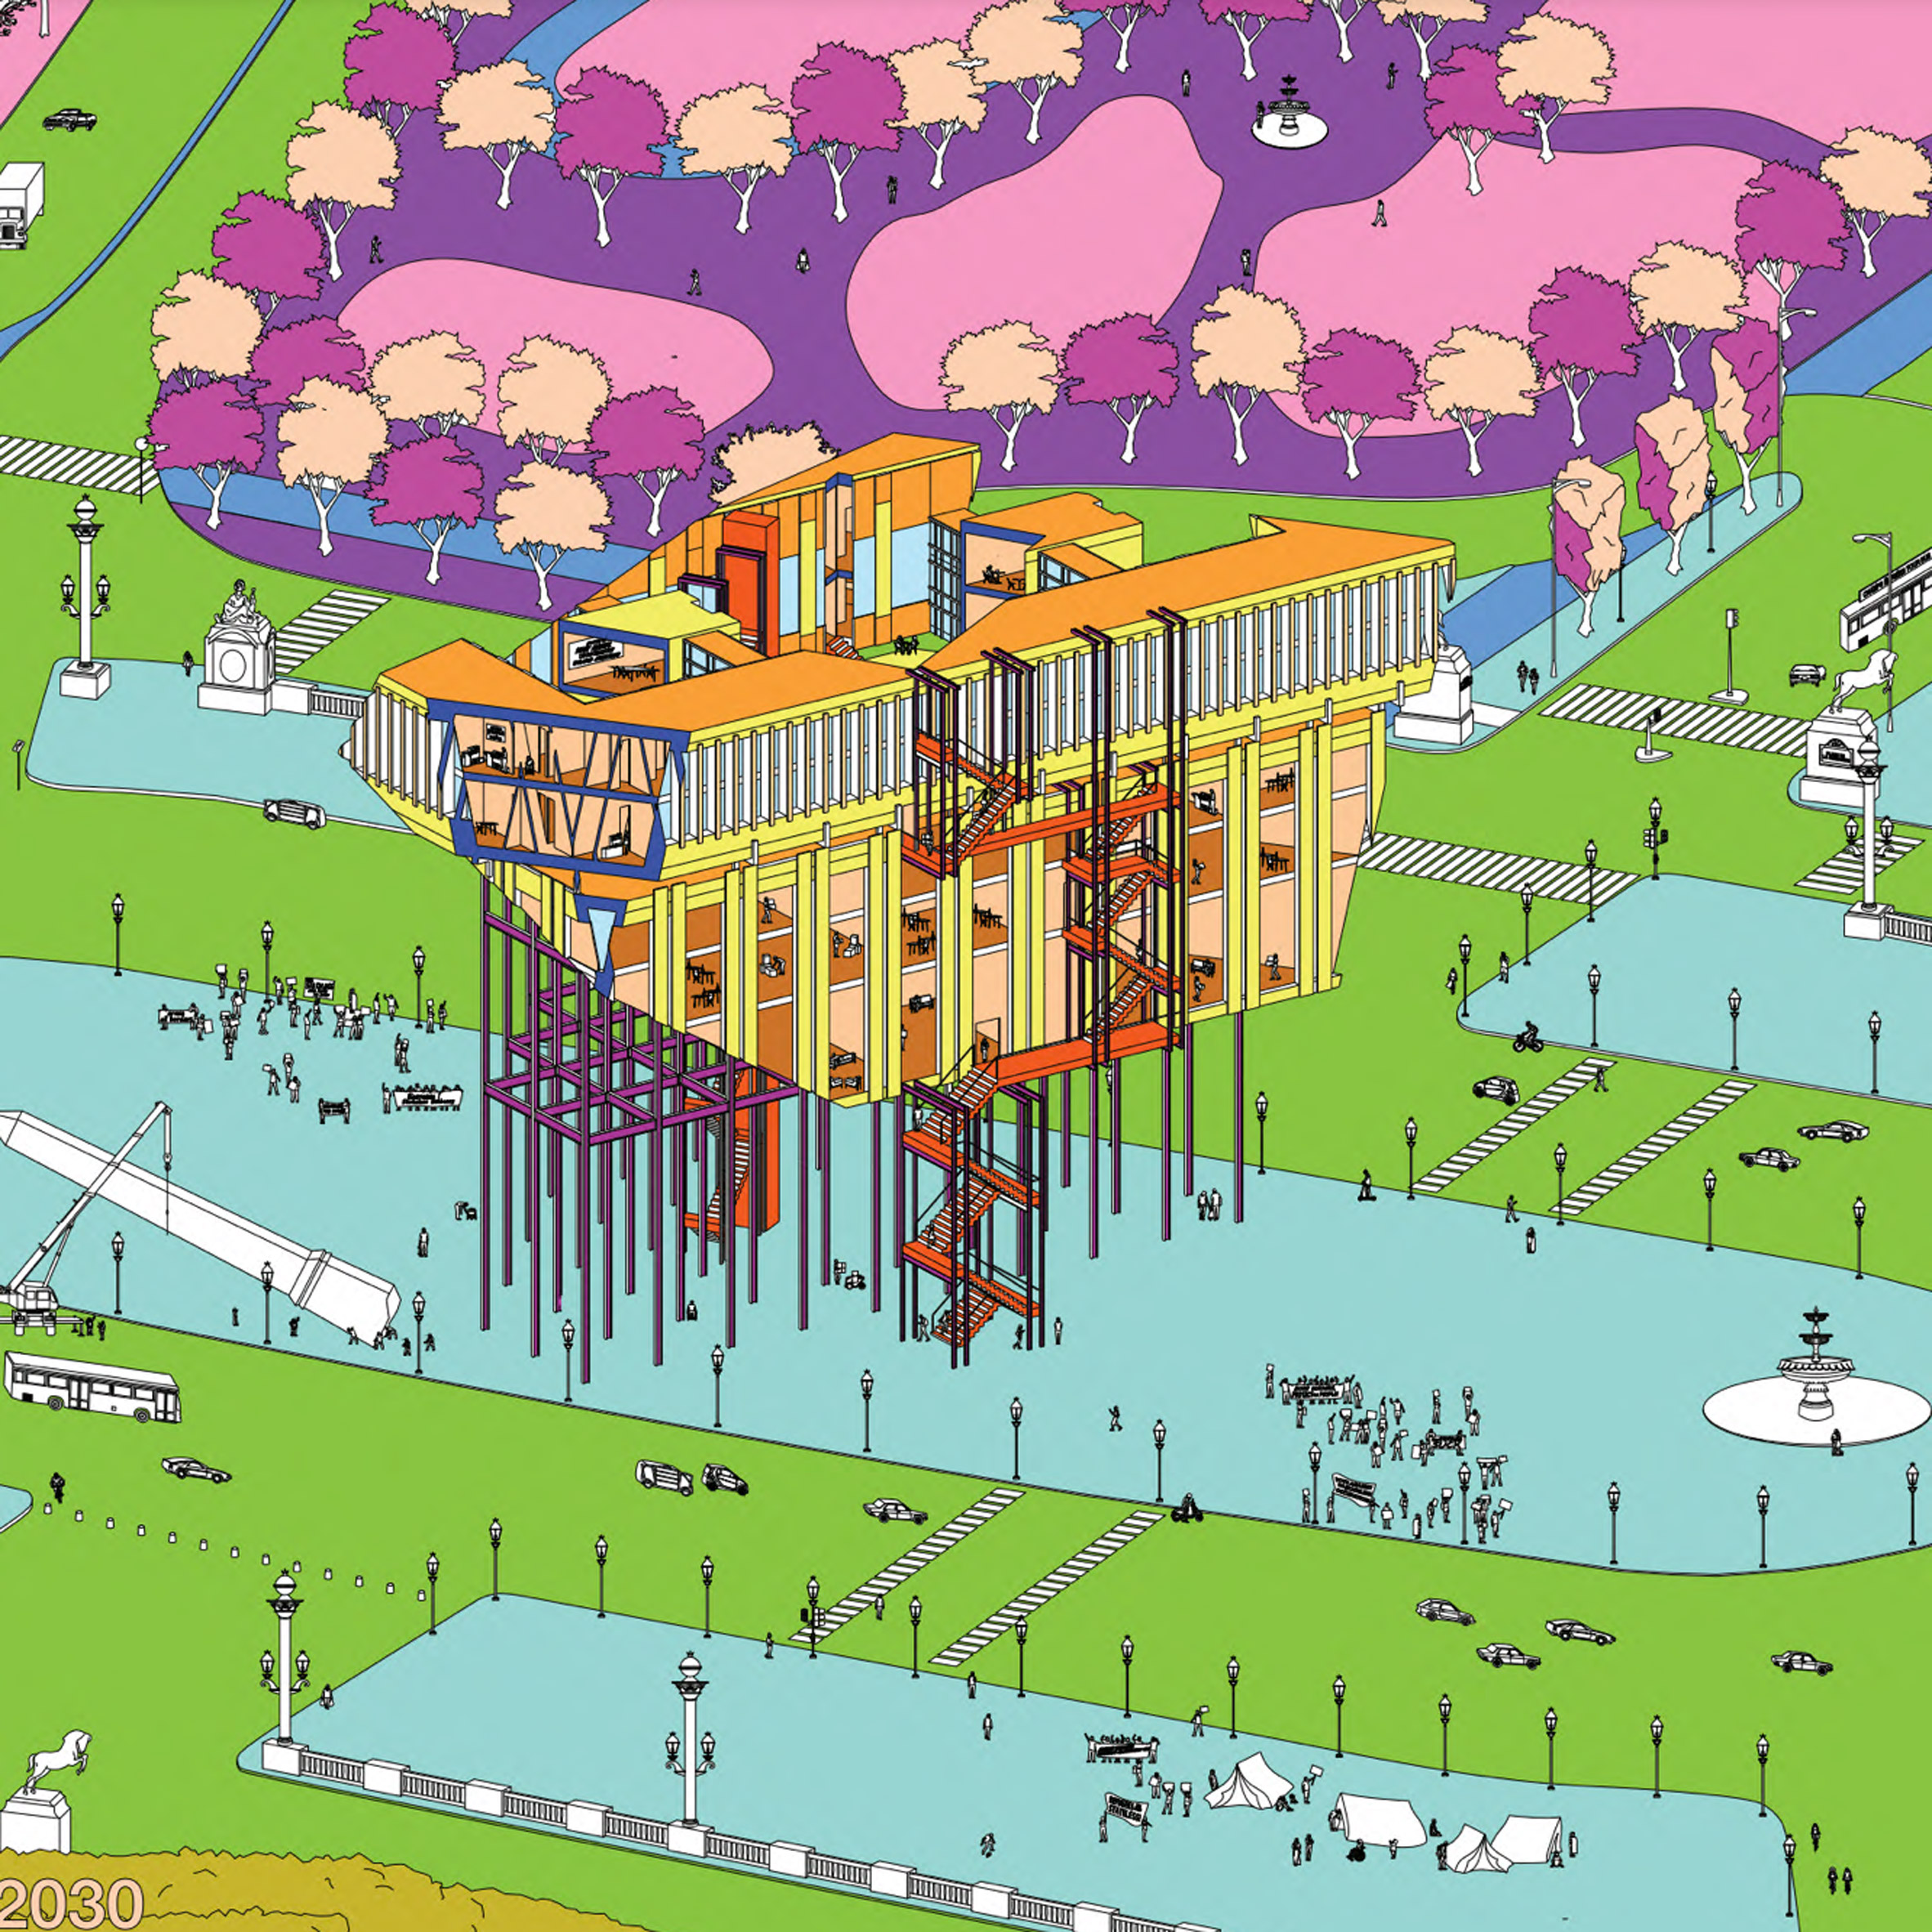 A colorful architectural illustration of the stateless Embassy by Delaney Inamine